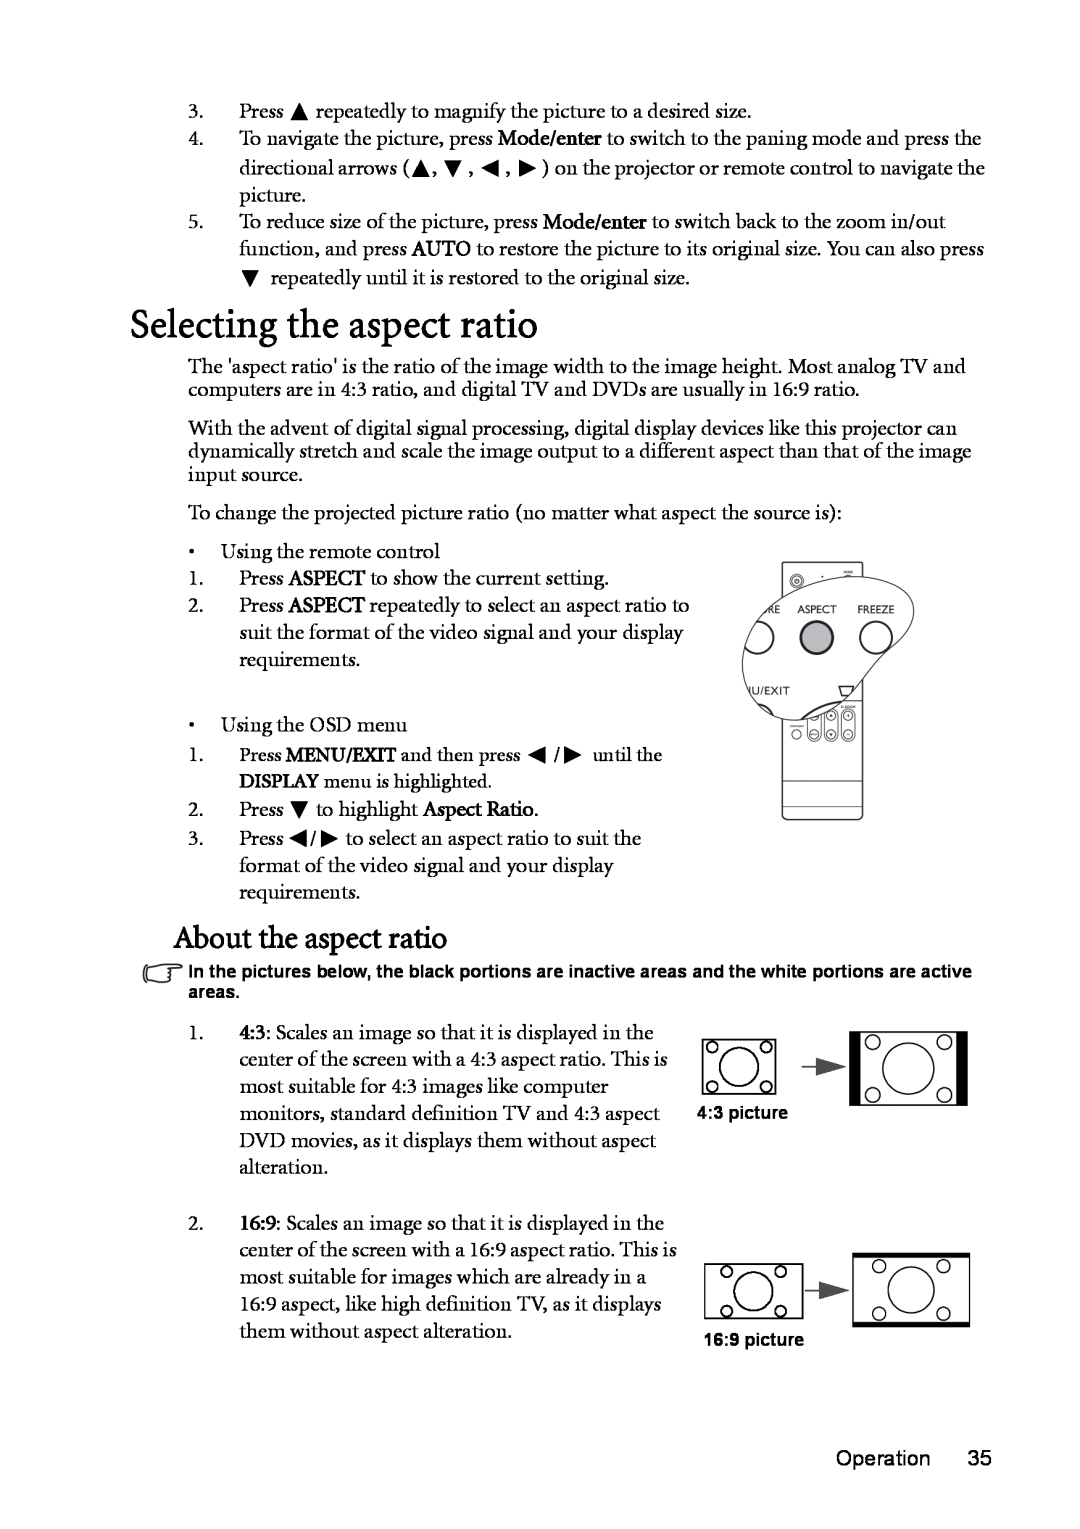 BenQ MP730 manual Selecting the aspect ratio, About the aspect ratio 